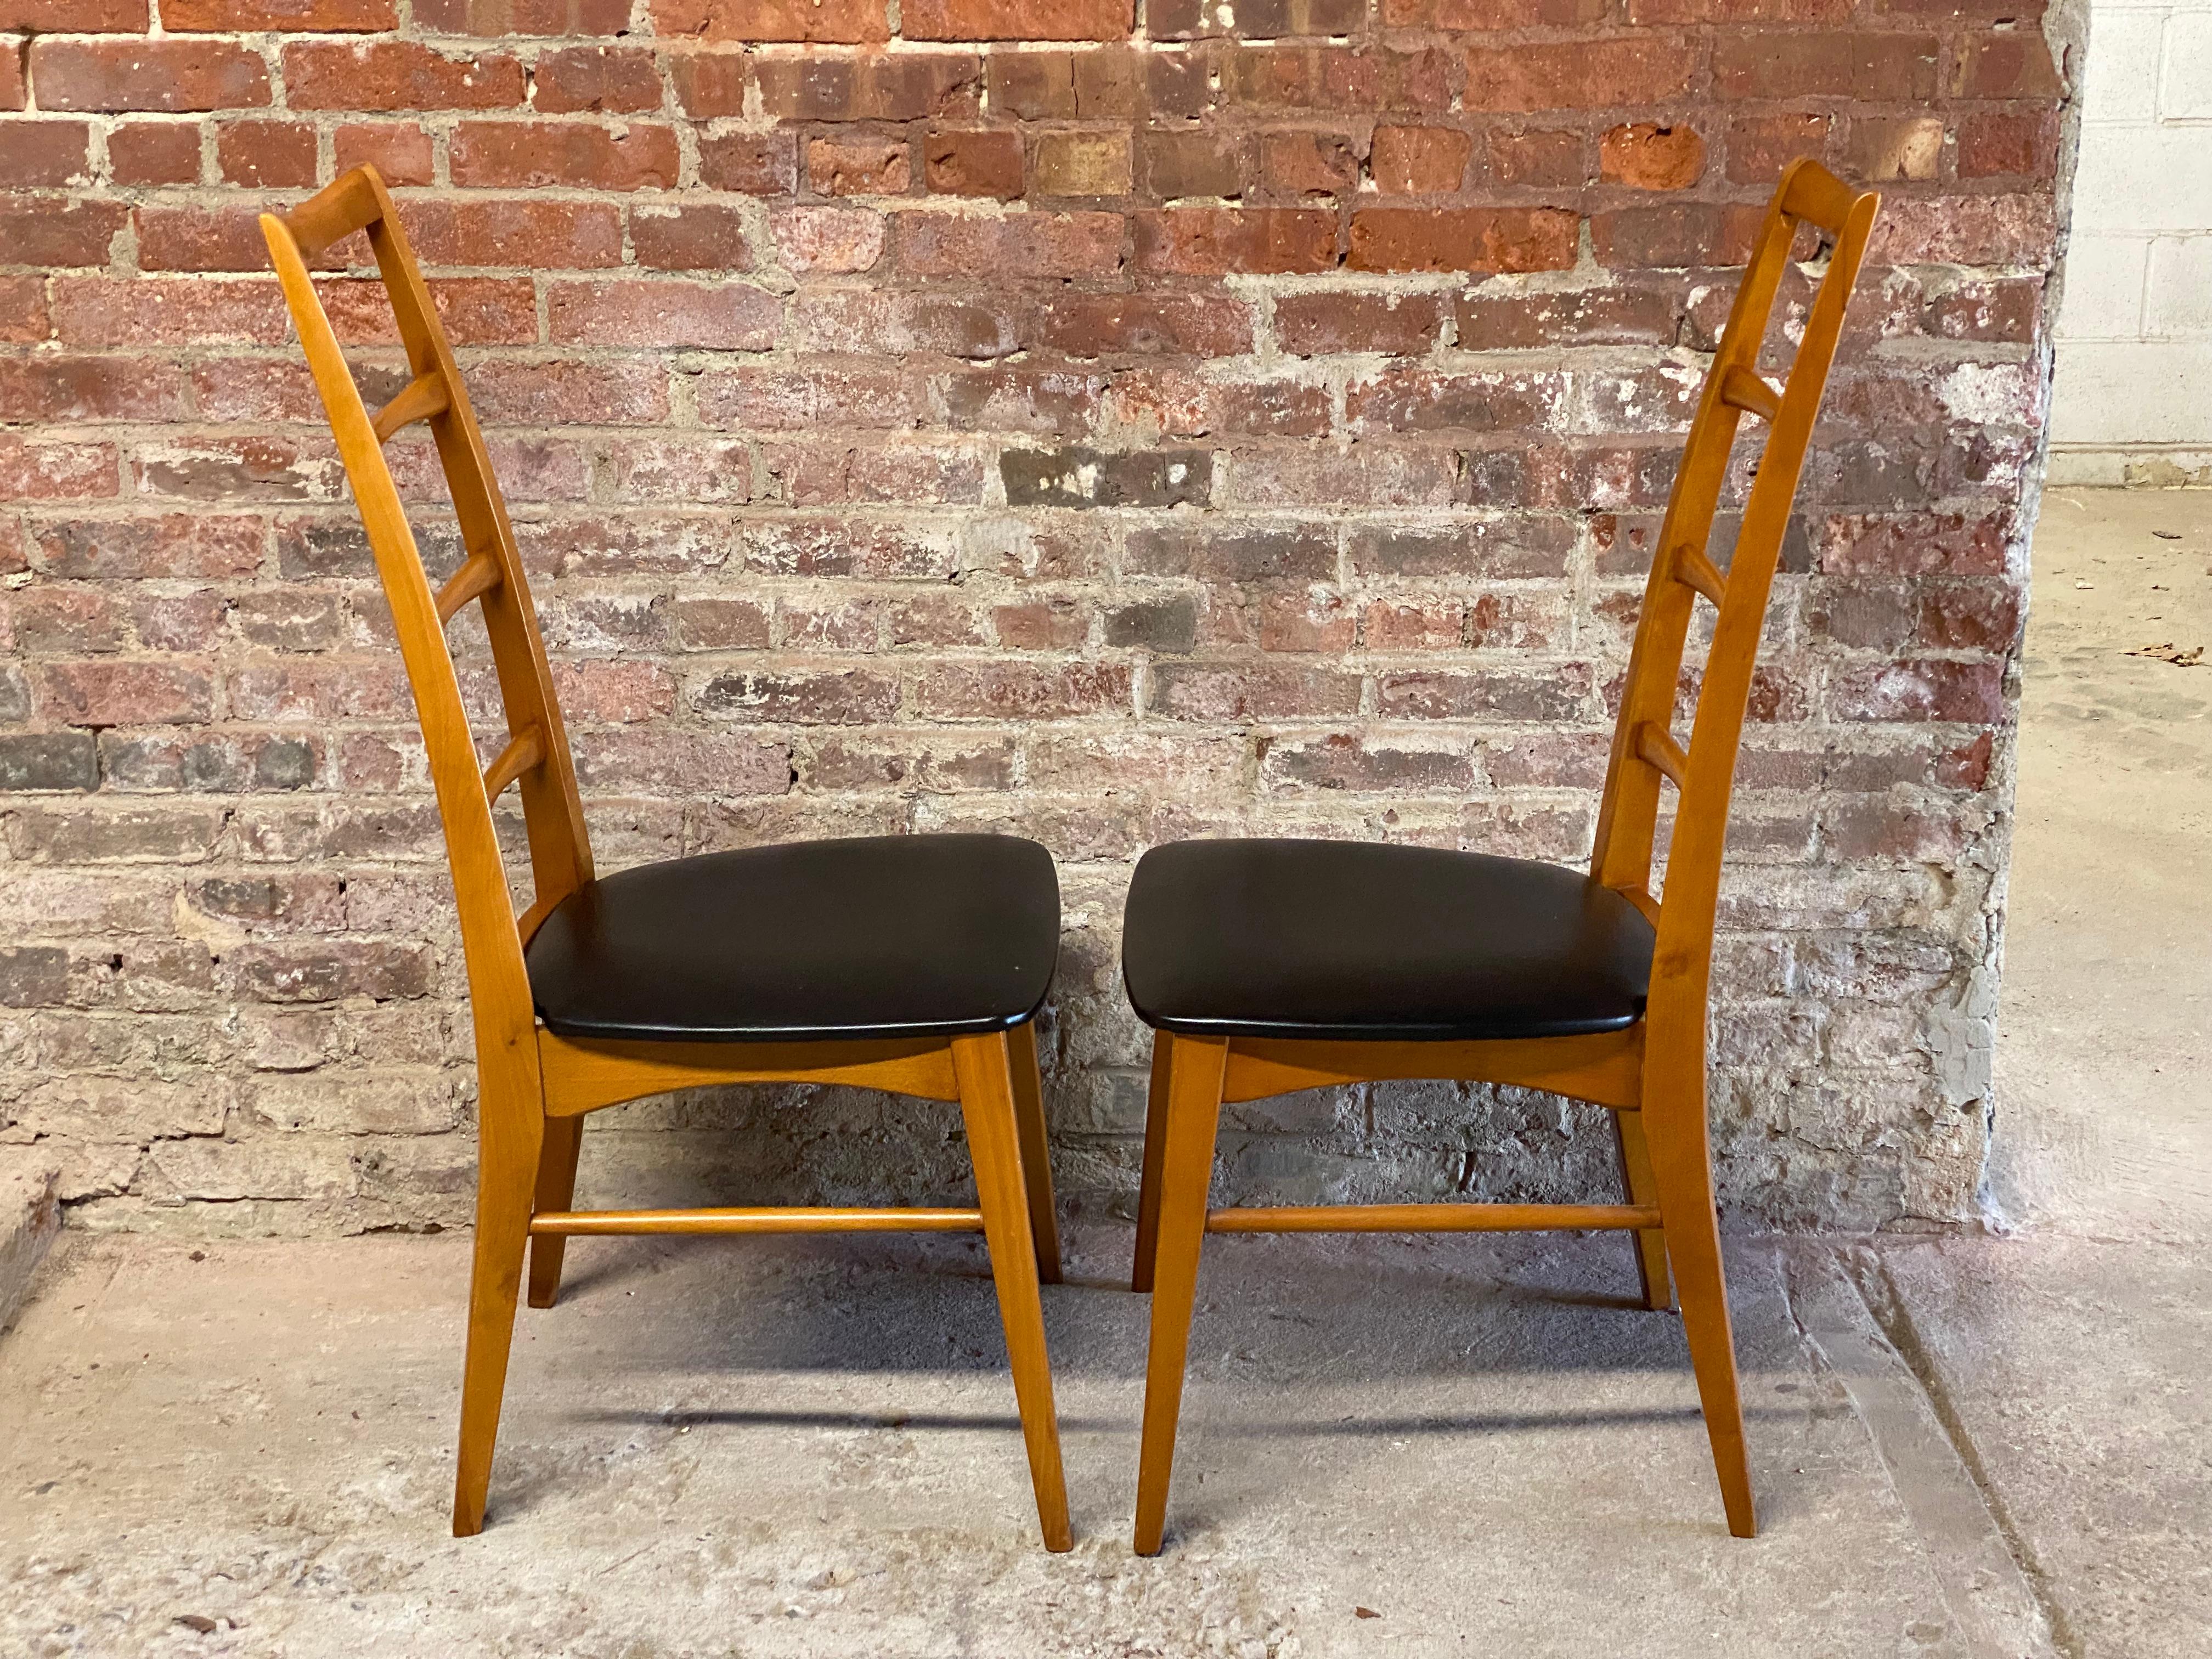 Upholstery Pair of Slovenian Mid-Century Modern Ladder Back Side Chairs Manner of Koefoed